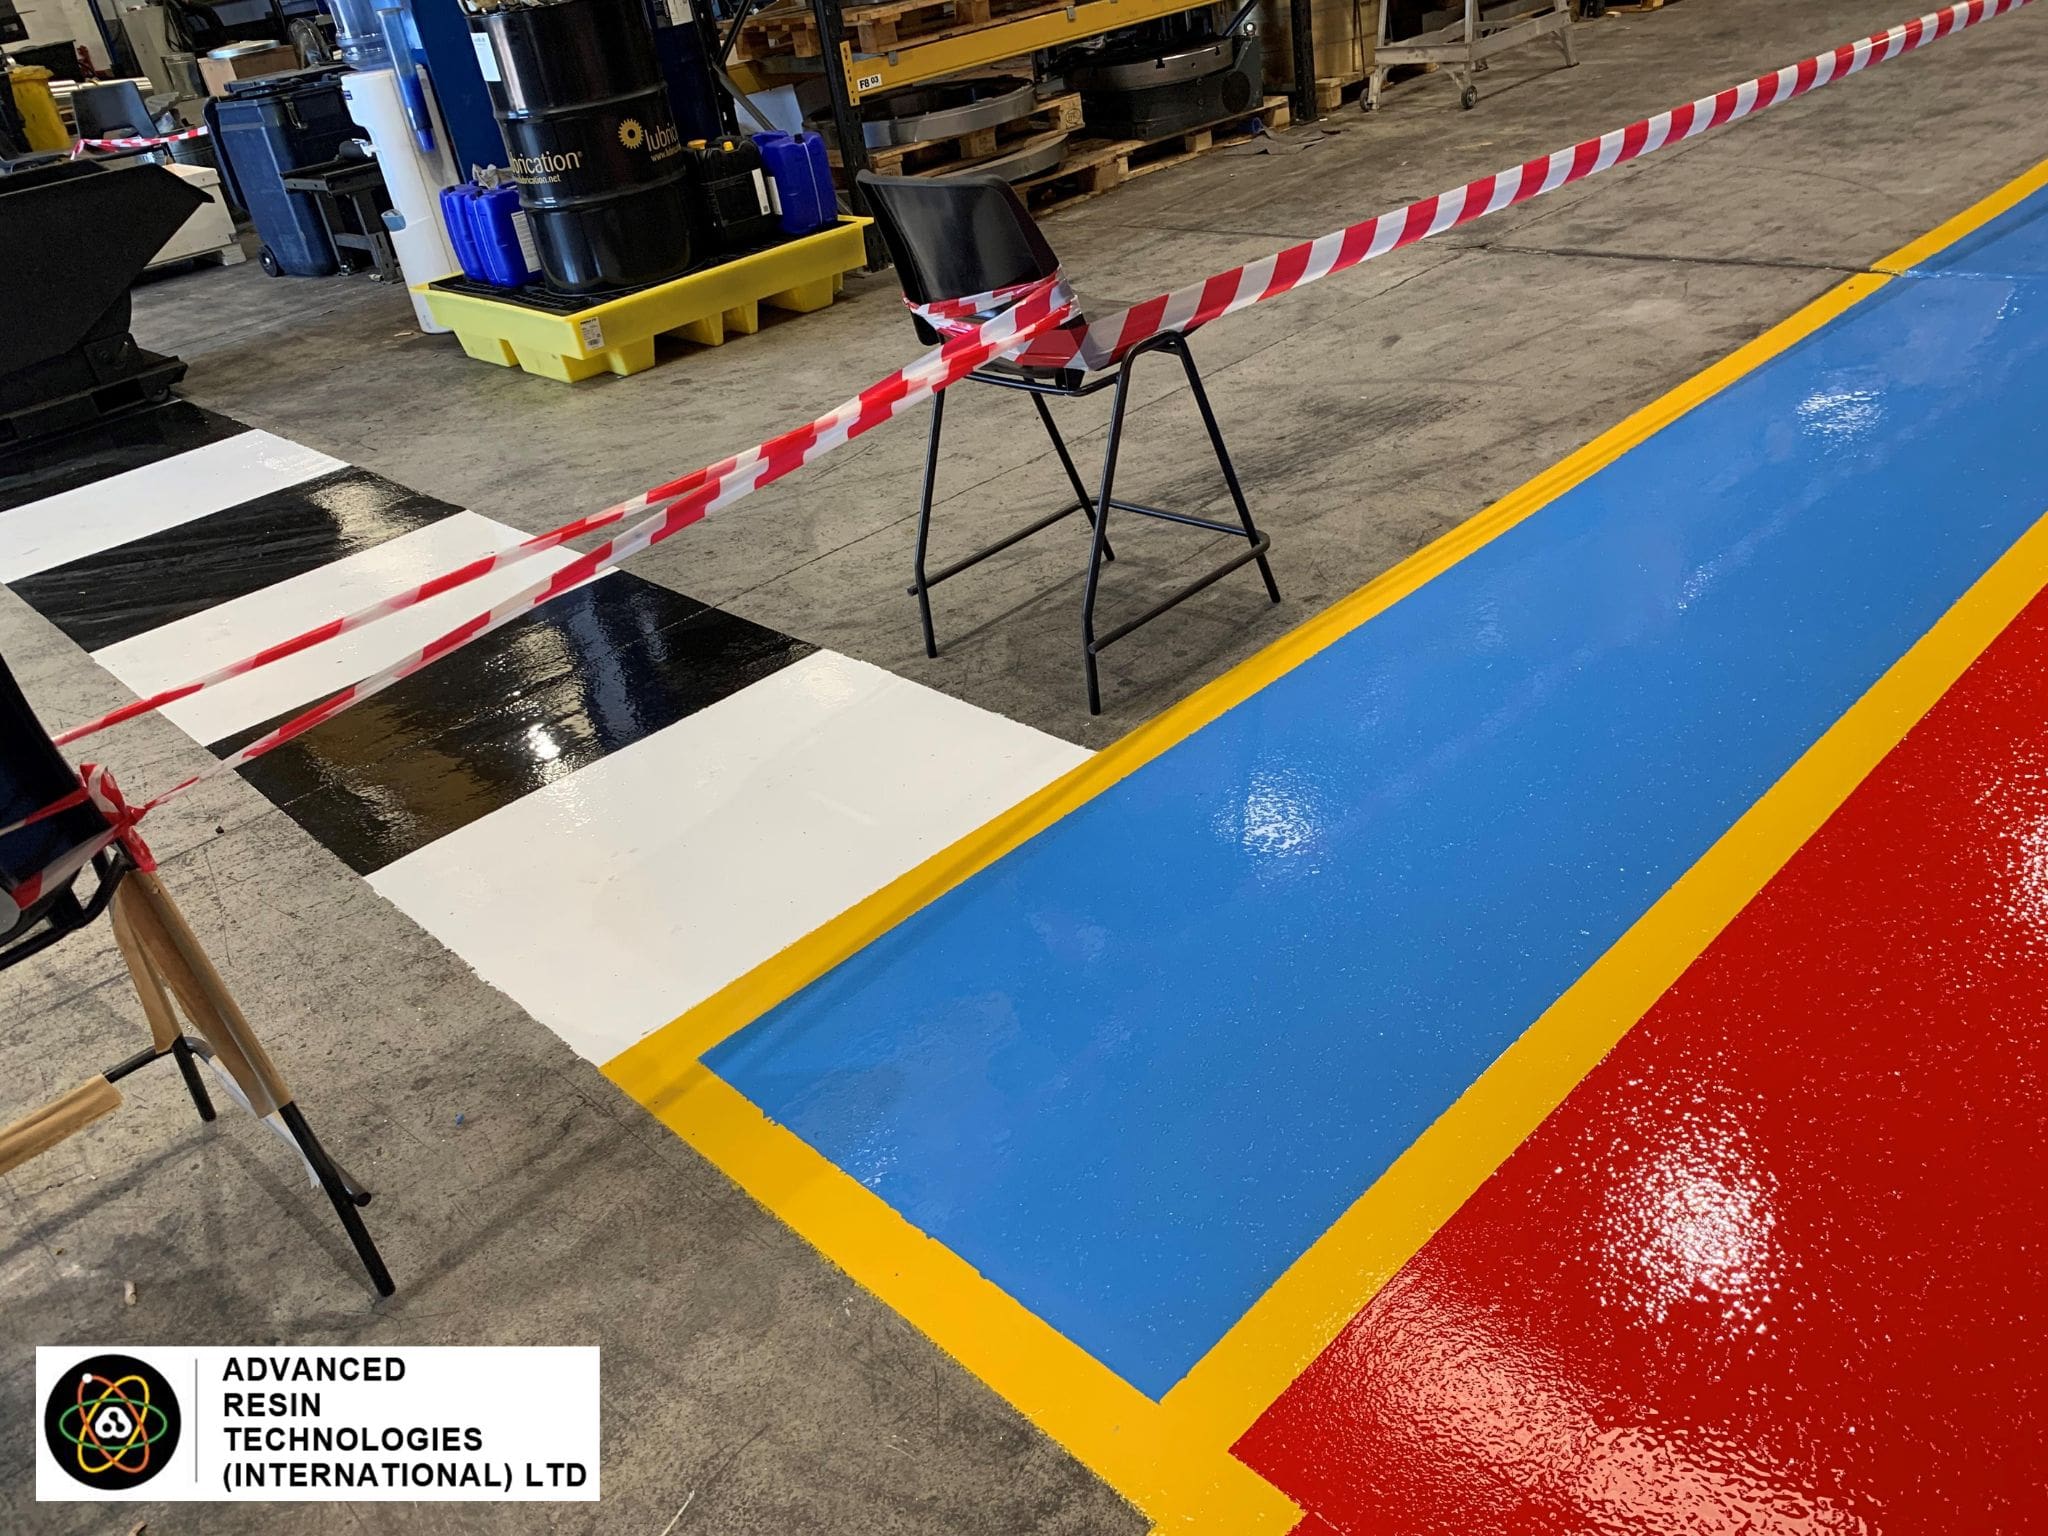 A distinctive and well designed epoxy resin flooring that was installed quickly and efficiently with minimal downtime